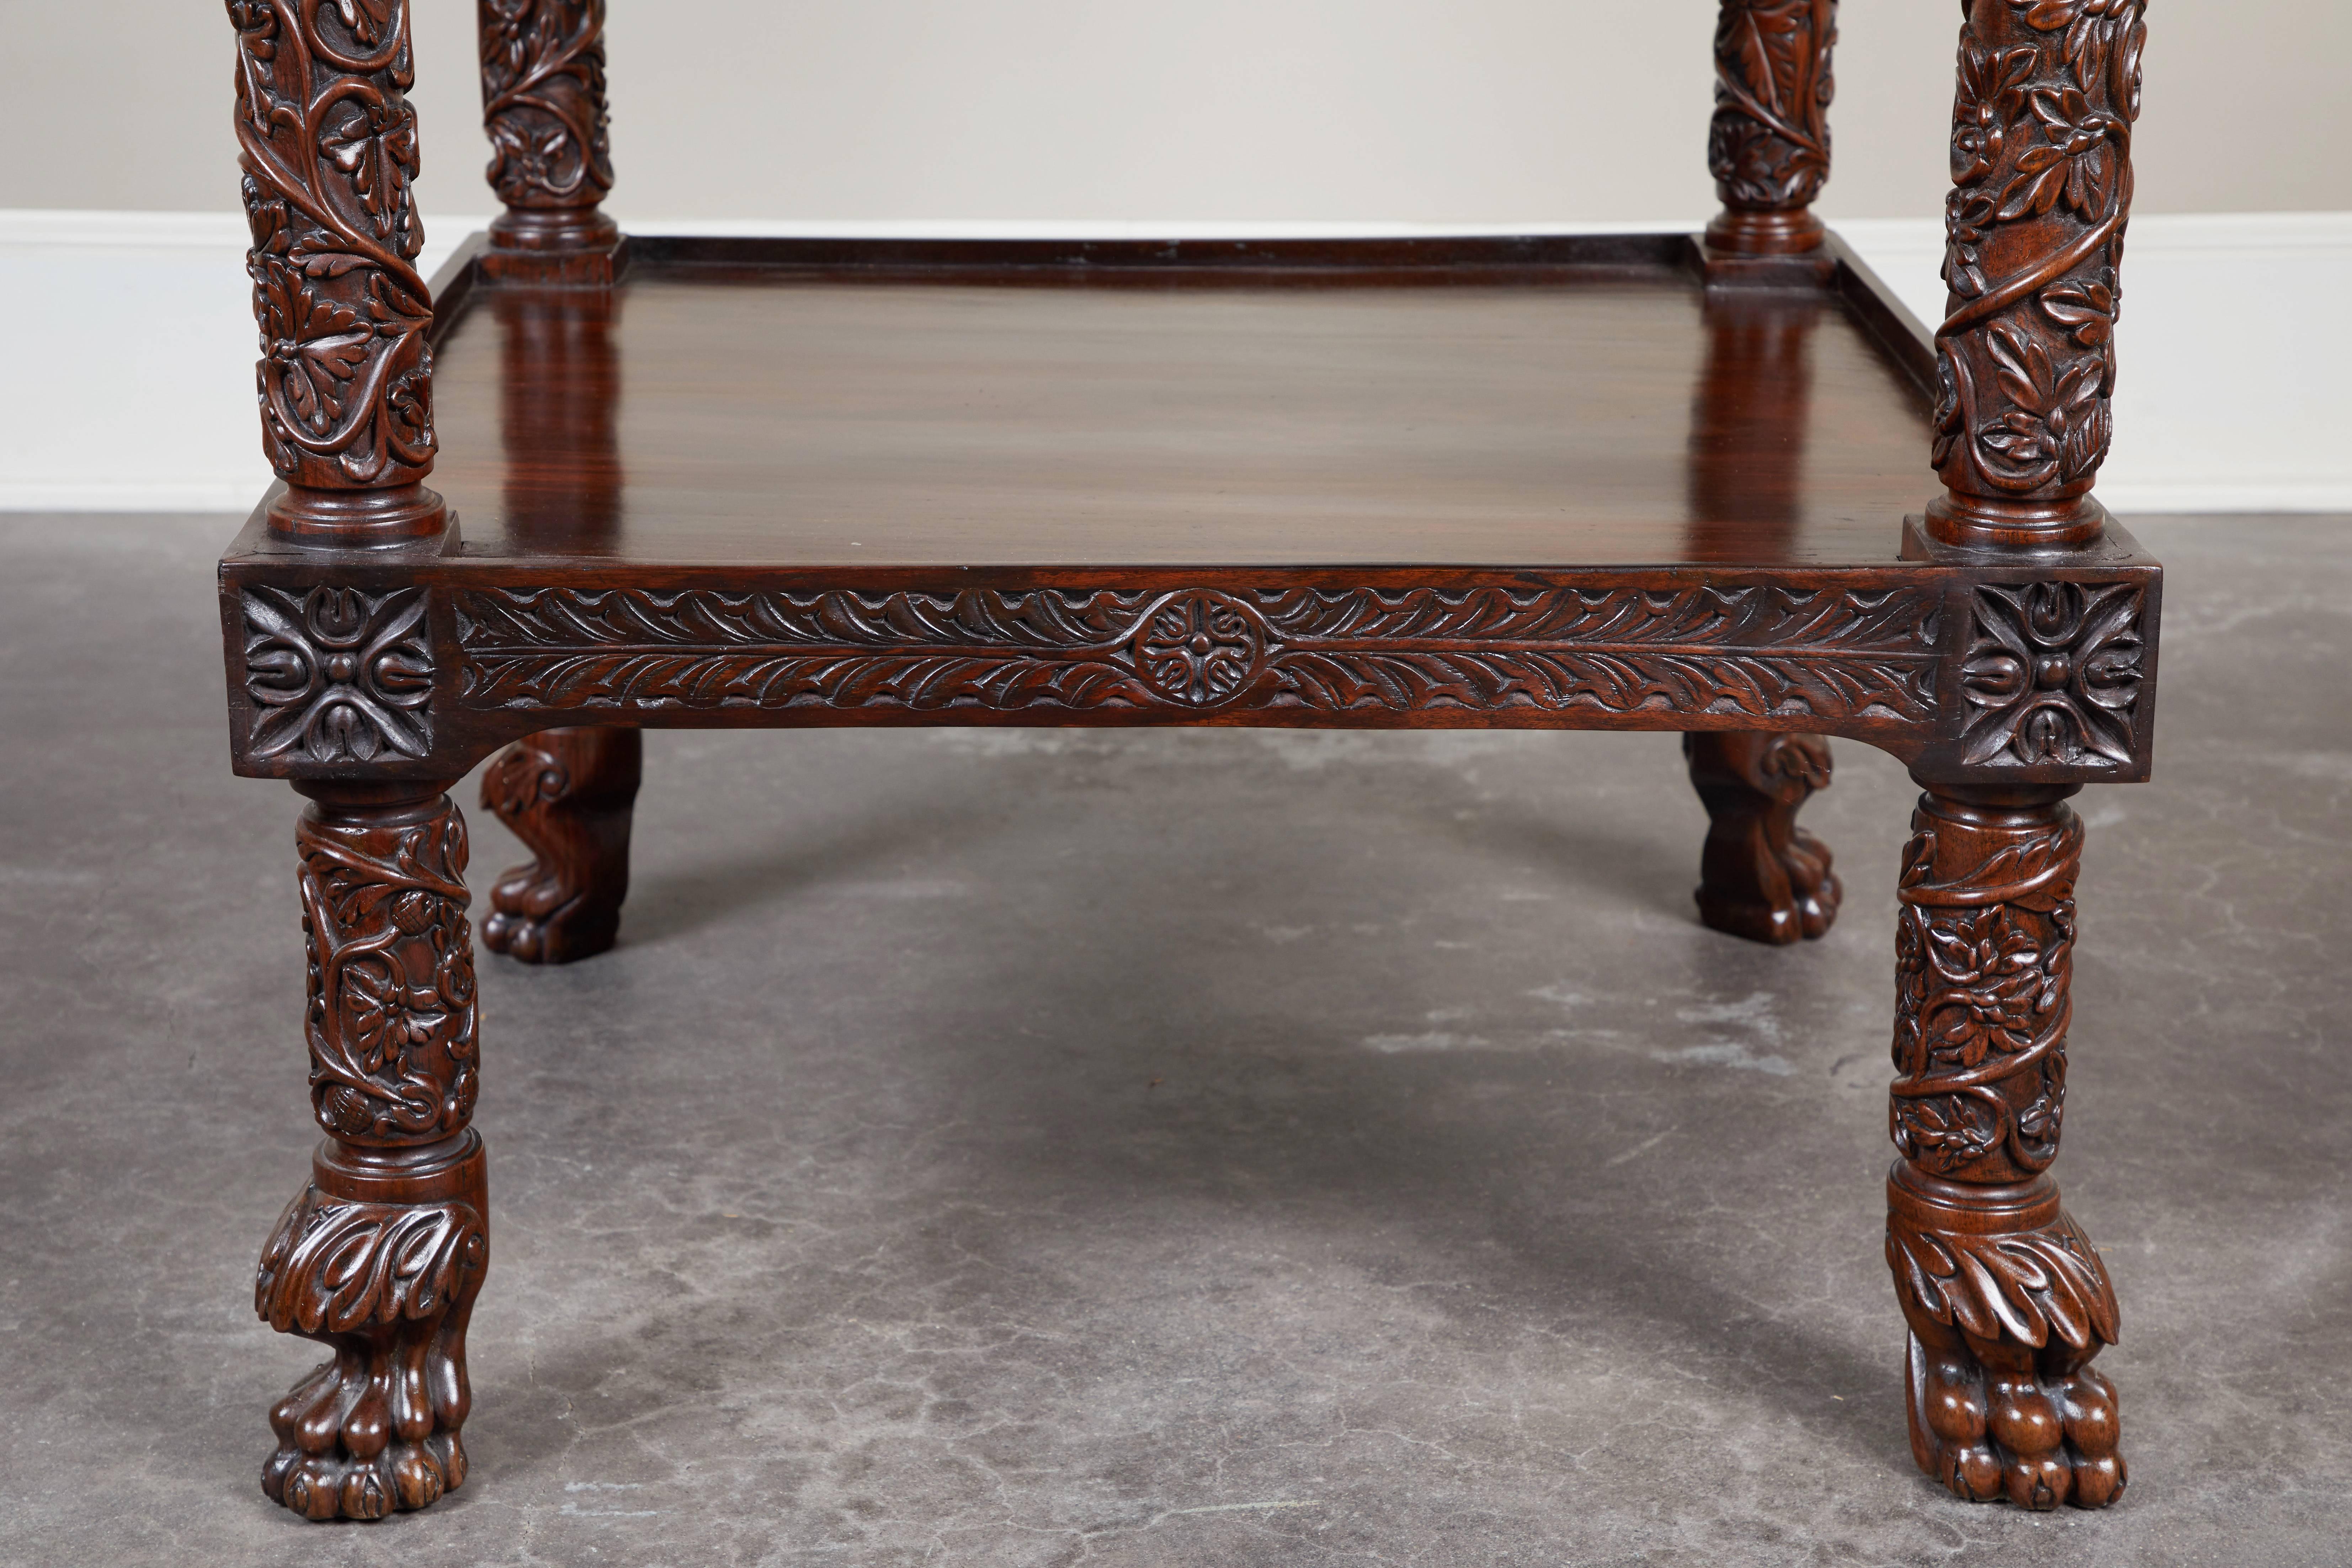 British Colonial 19th Century Four-Tiered Rosewood Carved Etagere